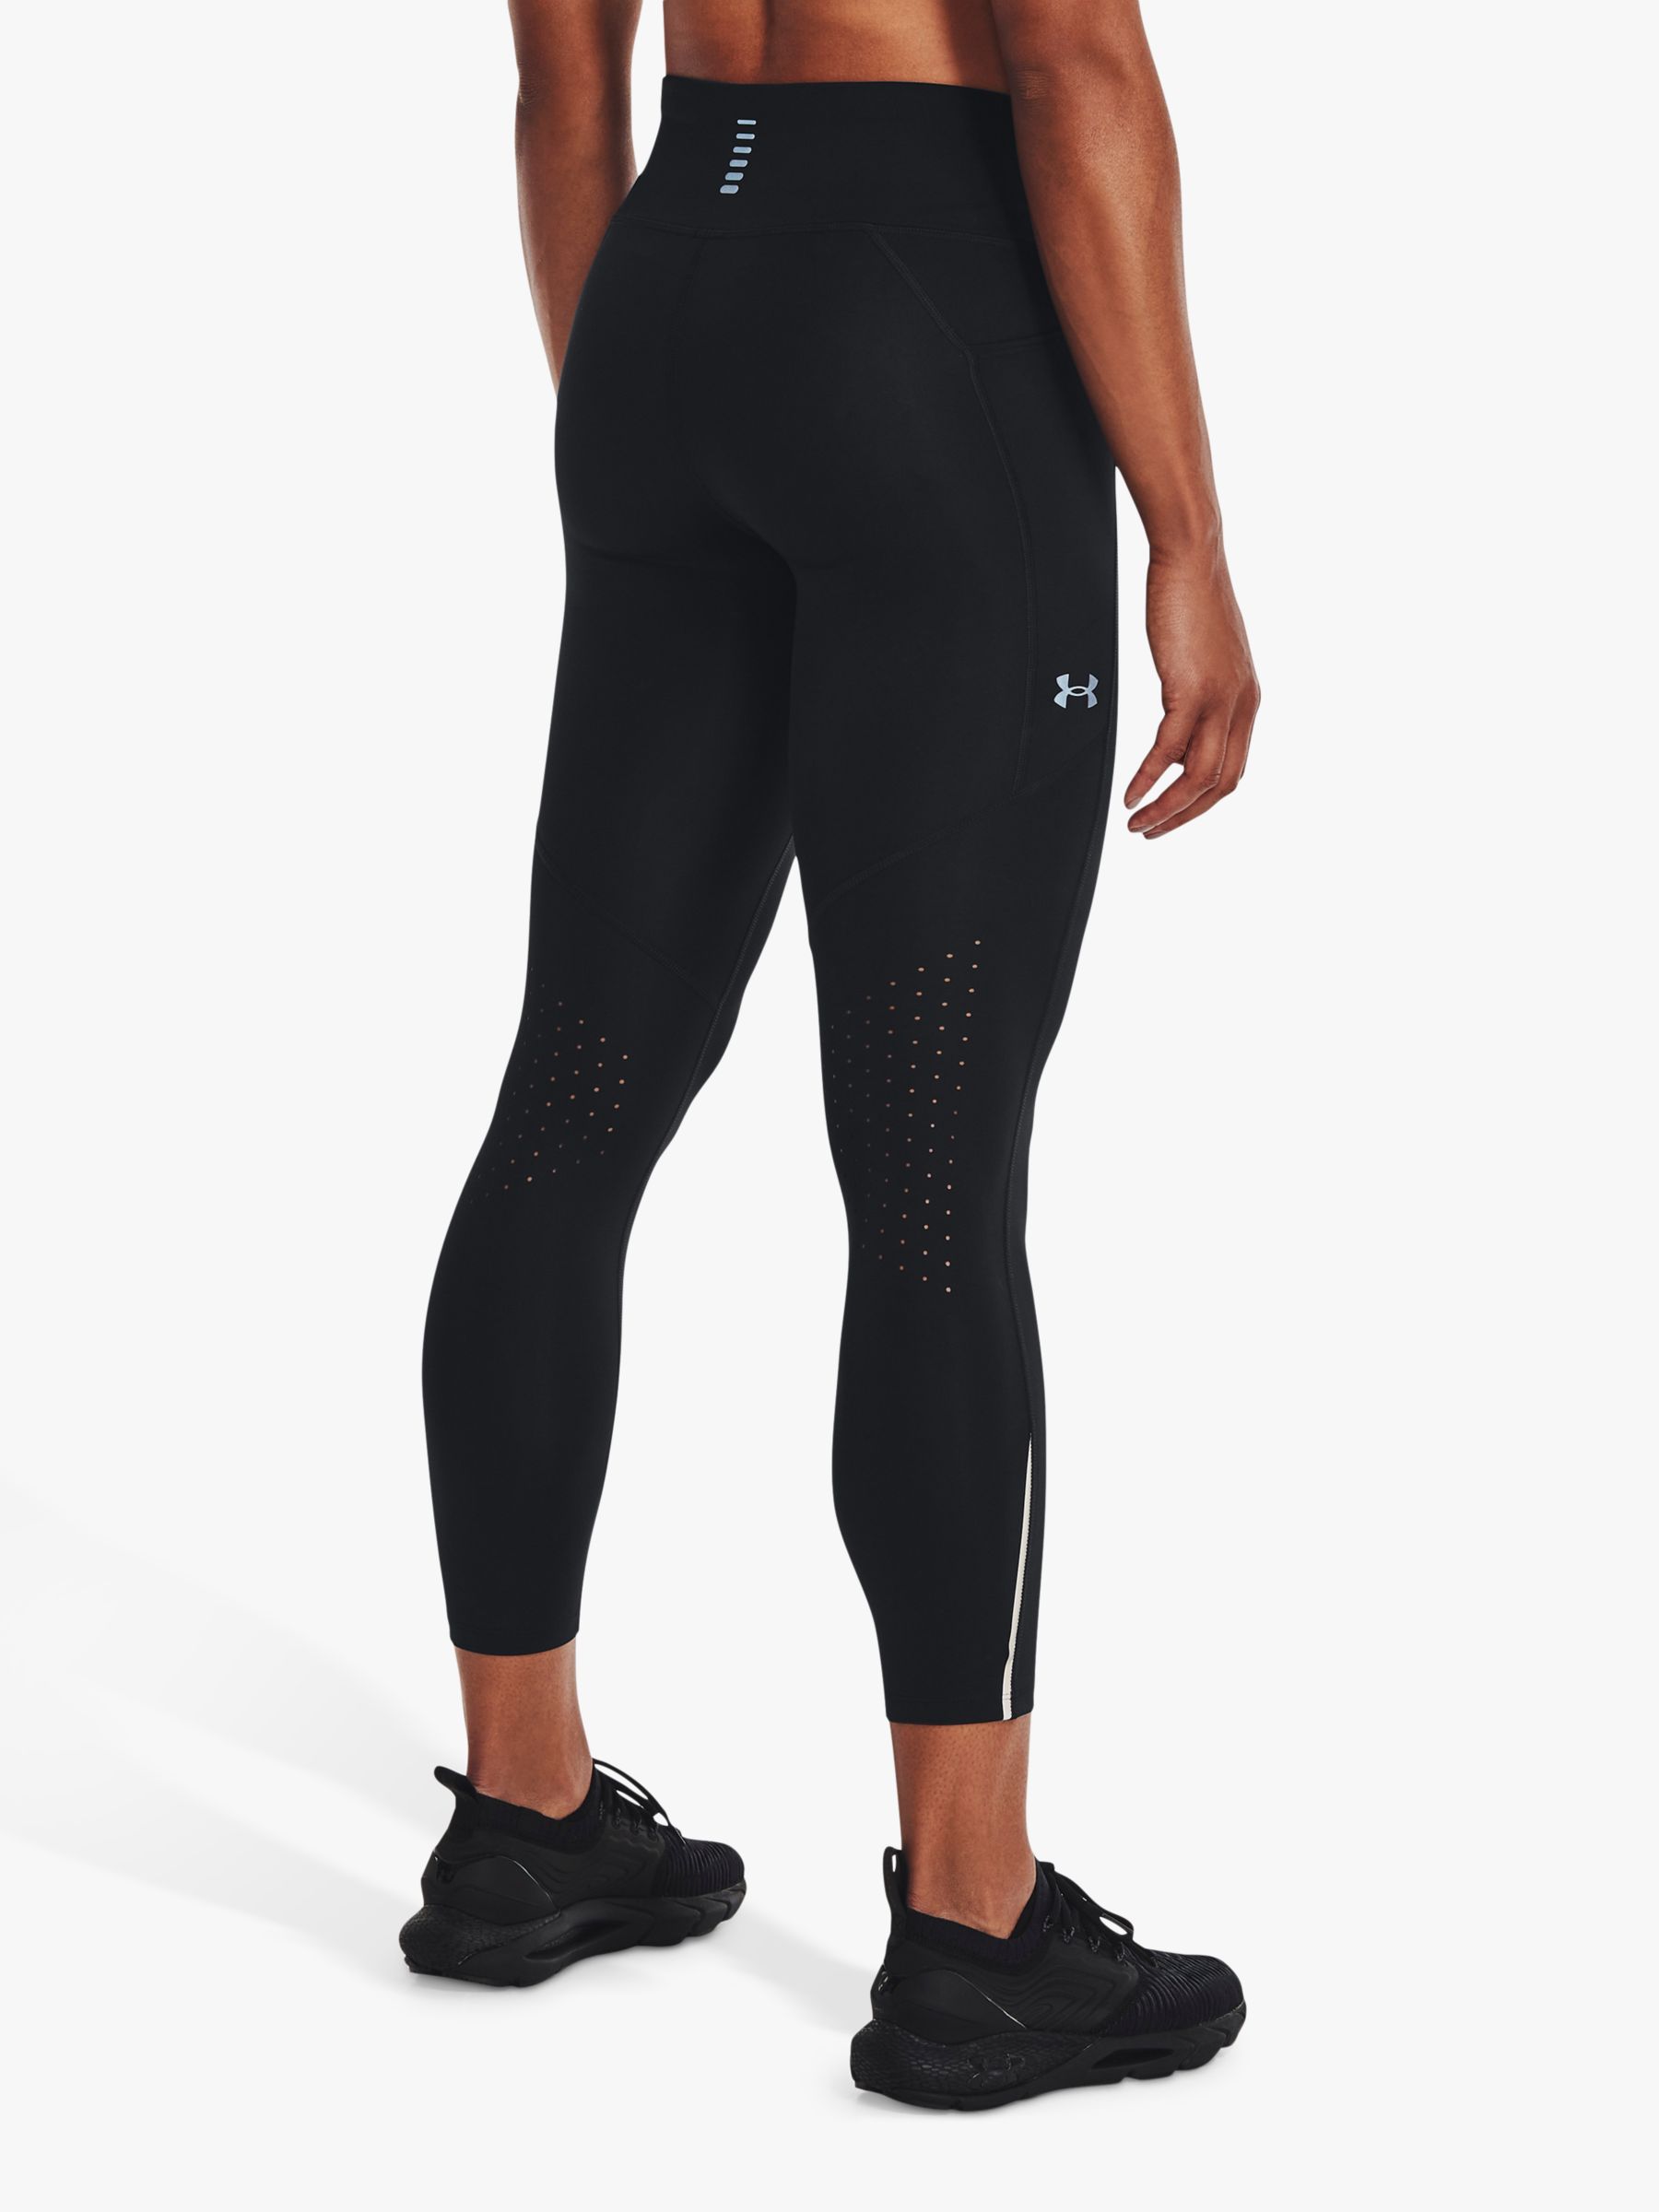 Under Armour Fly Fast 3.0 Ankle Grazer Running Leggings, Black/Reflective  at John Lewis & Partners